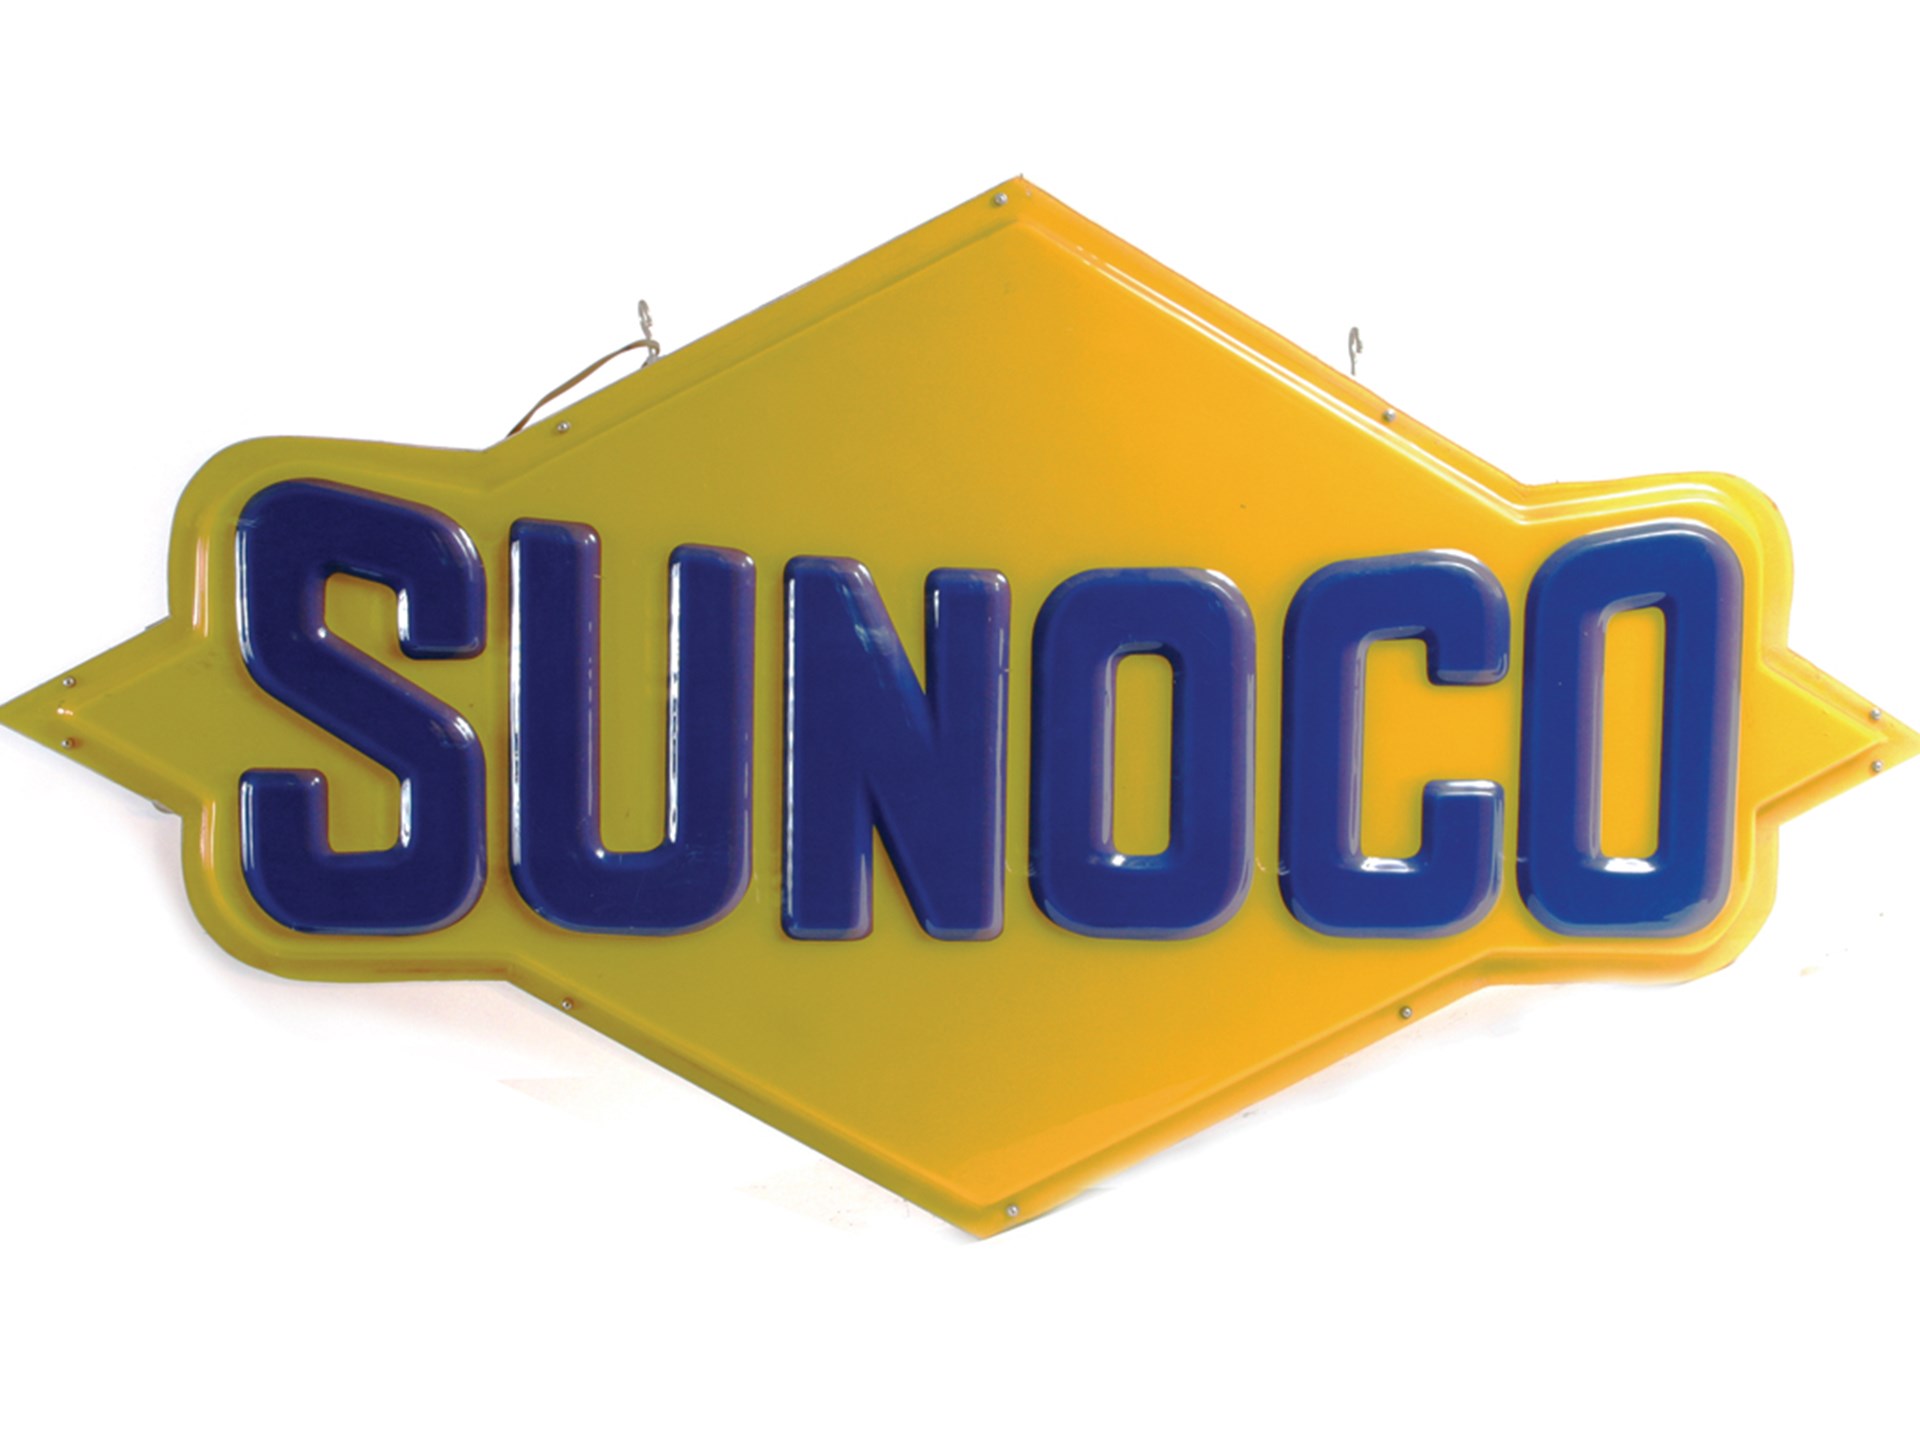 SUNOCO SIGN | Private Collection of Tom & Marlene Stackhouse | RM Sotheby's